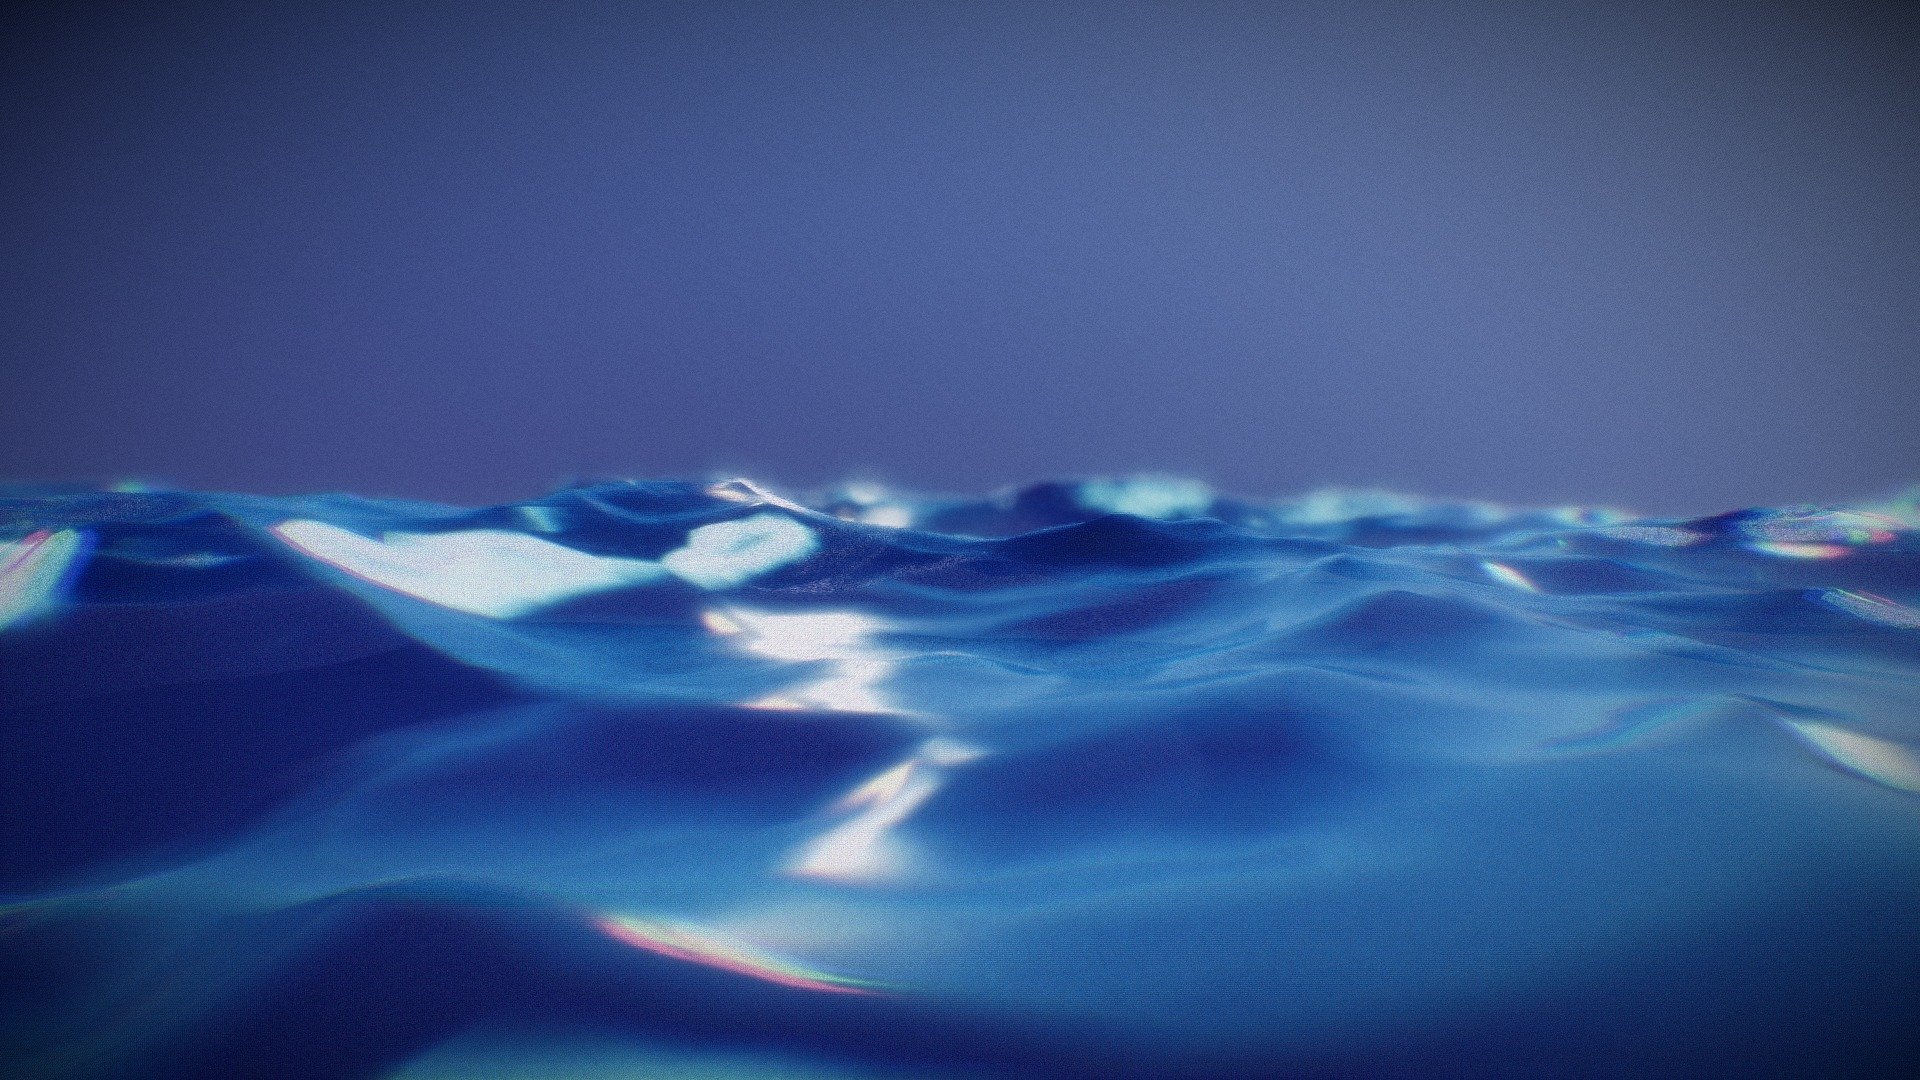 Animated stylized ocean water made in Blender 3d model